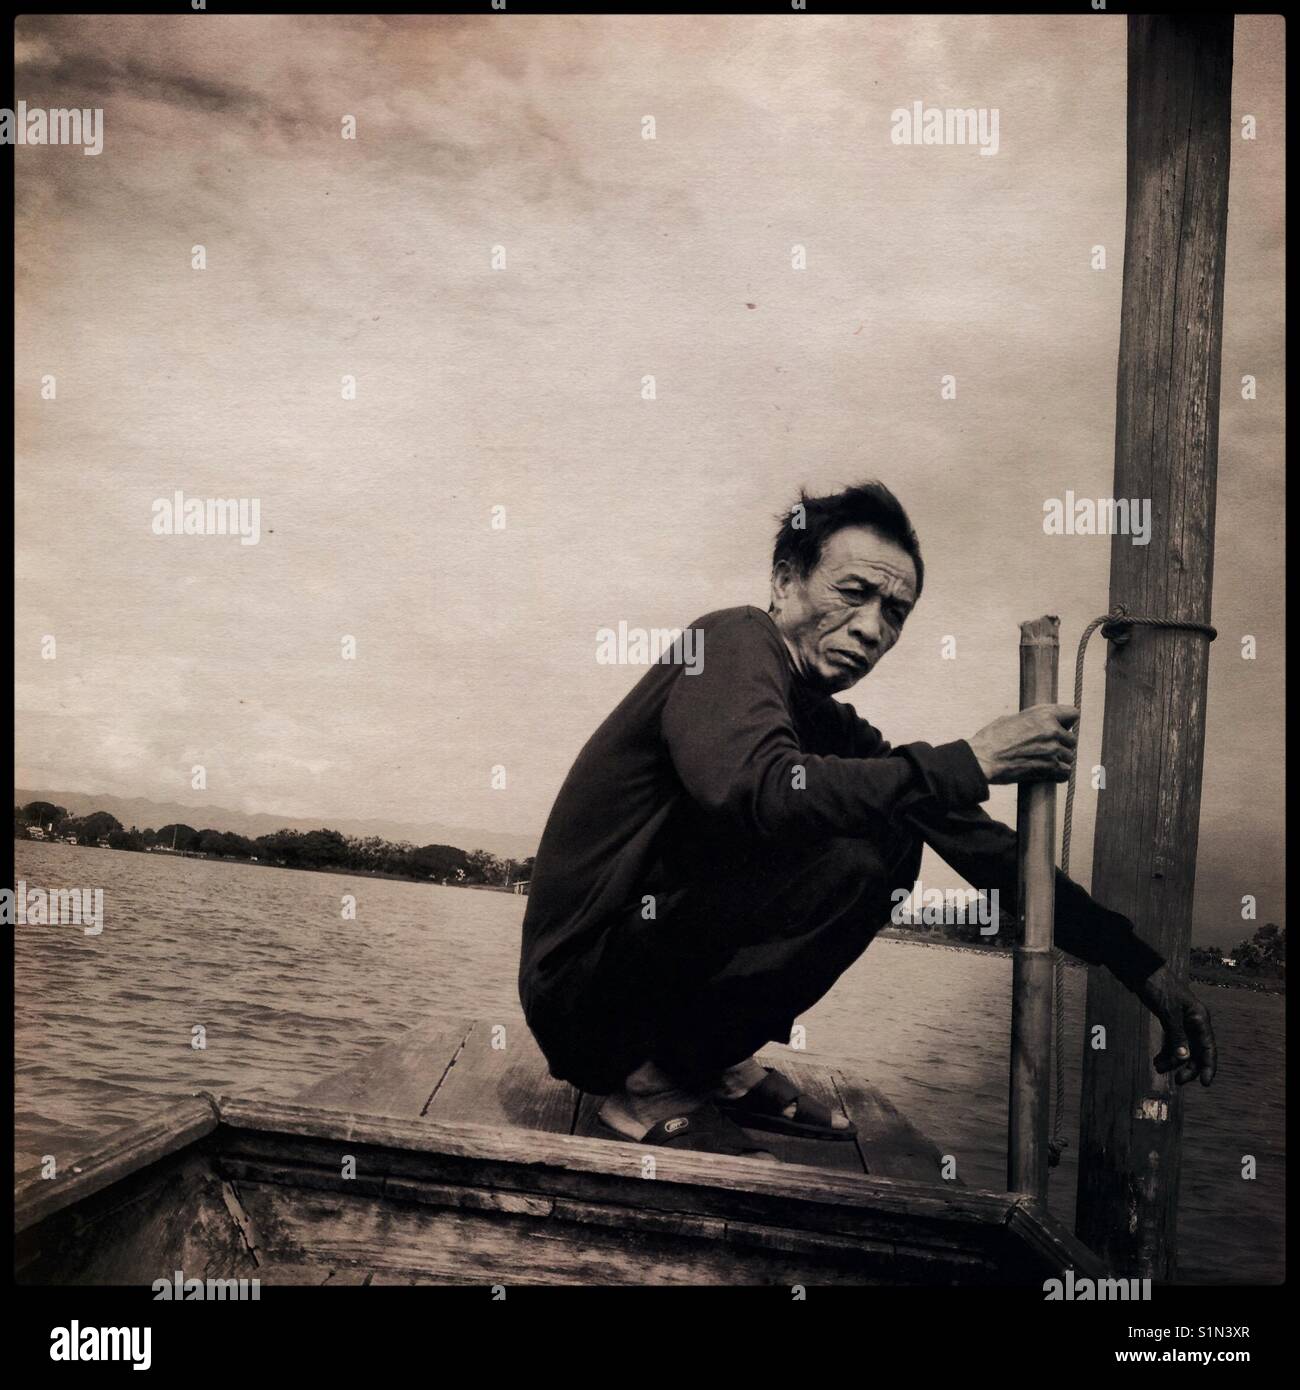 A boatman,who operates the boat between mainland and historical remains of Wat Tilok Aram,a submerged 500-year-old temple, that sits in the middle of Kwan Phayao( Phayao Lake), Phayao, Thailand. Stock Photo